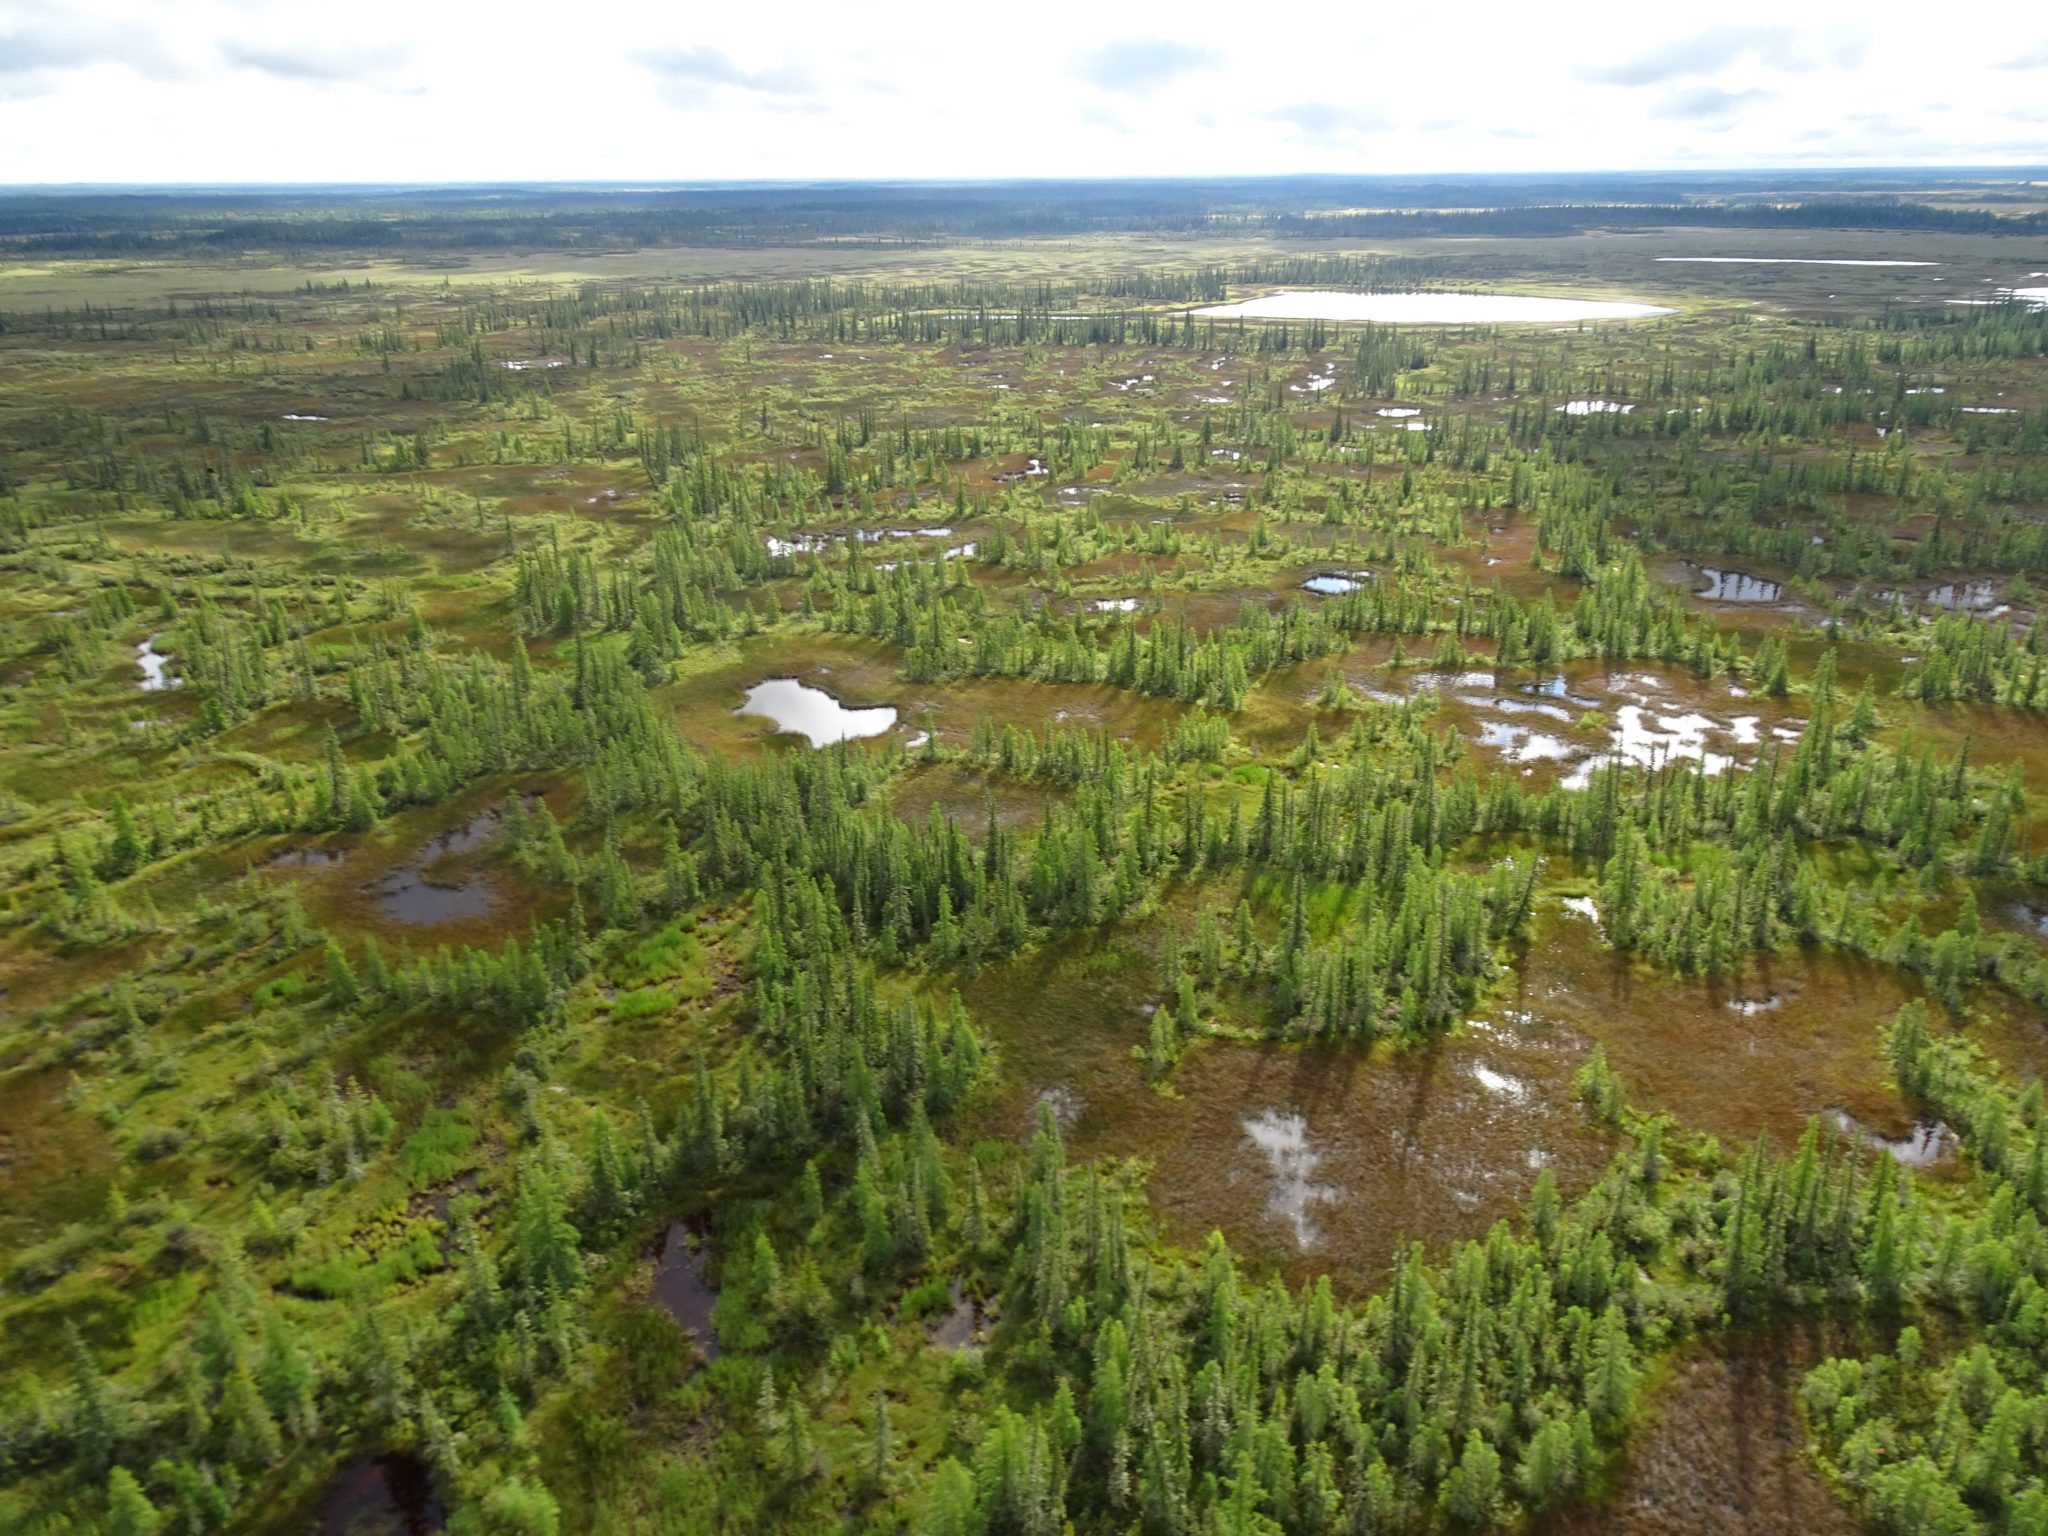 A complex of wetlands in Wood Buffalo National Park.